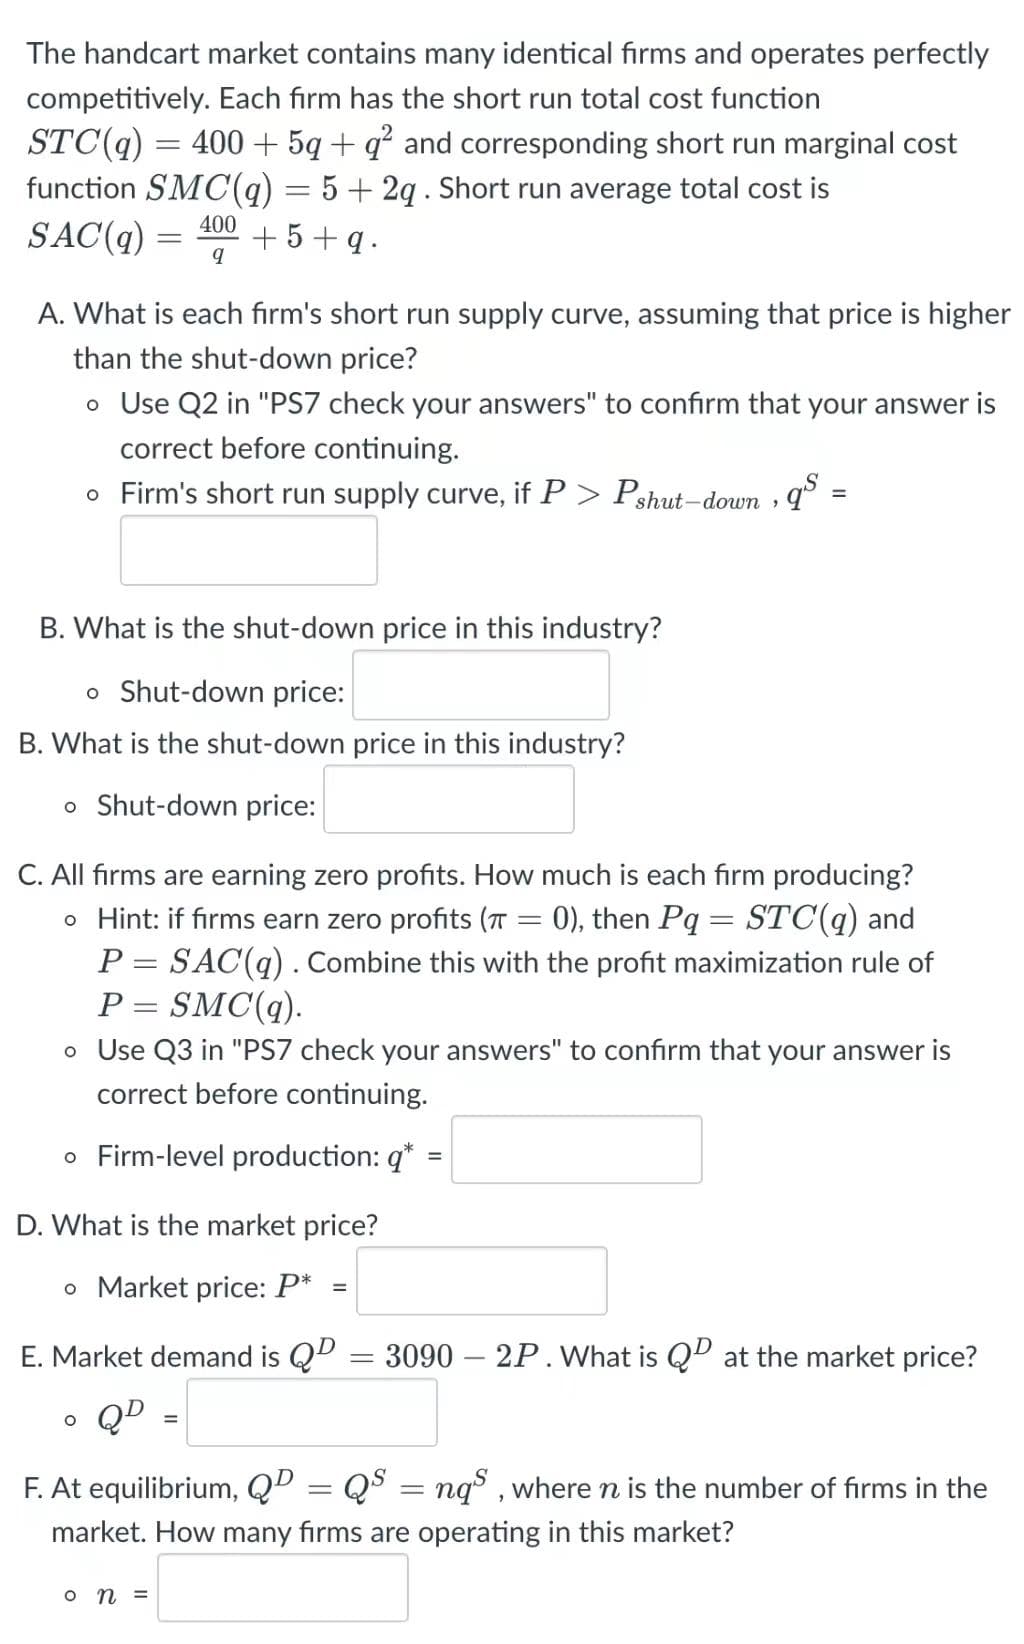 The handcart market contains many identical firms and operates perfectly
competitively. Each firm has the short run total cost function
STC(q) = 400 + 5q+ q² and corresponding short run marginal cost
function SMC(q) = 5 + 2q . Short run average total cost is
SAC(q) =
400
+5+ q.
A. What is each fırm's short run supply curve, assuming that price is higher
than the shut-down price?
o Use Q2 in "PS7 check your answers" to confirm that your answer is
correct before continuing.
o Firm's short run supply curve, if P > Pshut-down , q° :
B. What is the shut-down price in this industry?
o Shut-down price:
B. What is the shut-down price in this industry?
o Shut-down price:
C. All firms are earning zero profits. How much is each firm producing?
o Hint: if firms earn zero profits (T = 0), then Pq= STC(q) and
P = SAC(q) . Combine this with the profit maximization rule of
P = SMC(q).
o Use Q3 in "PS7 check your answers" to confirm that your answer is
%3D
%3D
correct before continuing.
o Firm-level production: q*
D. What is the market price?
o Market price: P*
%3D
E. Market demand is QD
3090 – 2P.What is QP at the market price?
QD
F. At equilibrium, QD = Q$ = nq , where n is the number of firms in the
market. How many firms are operating in this market?
o n =
